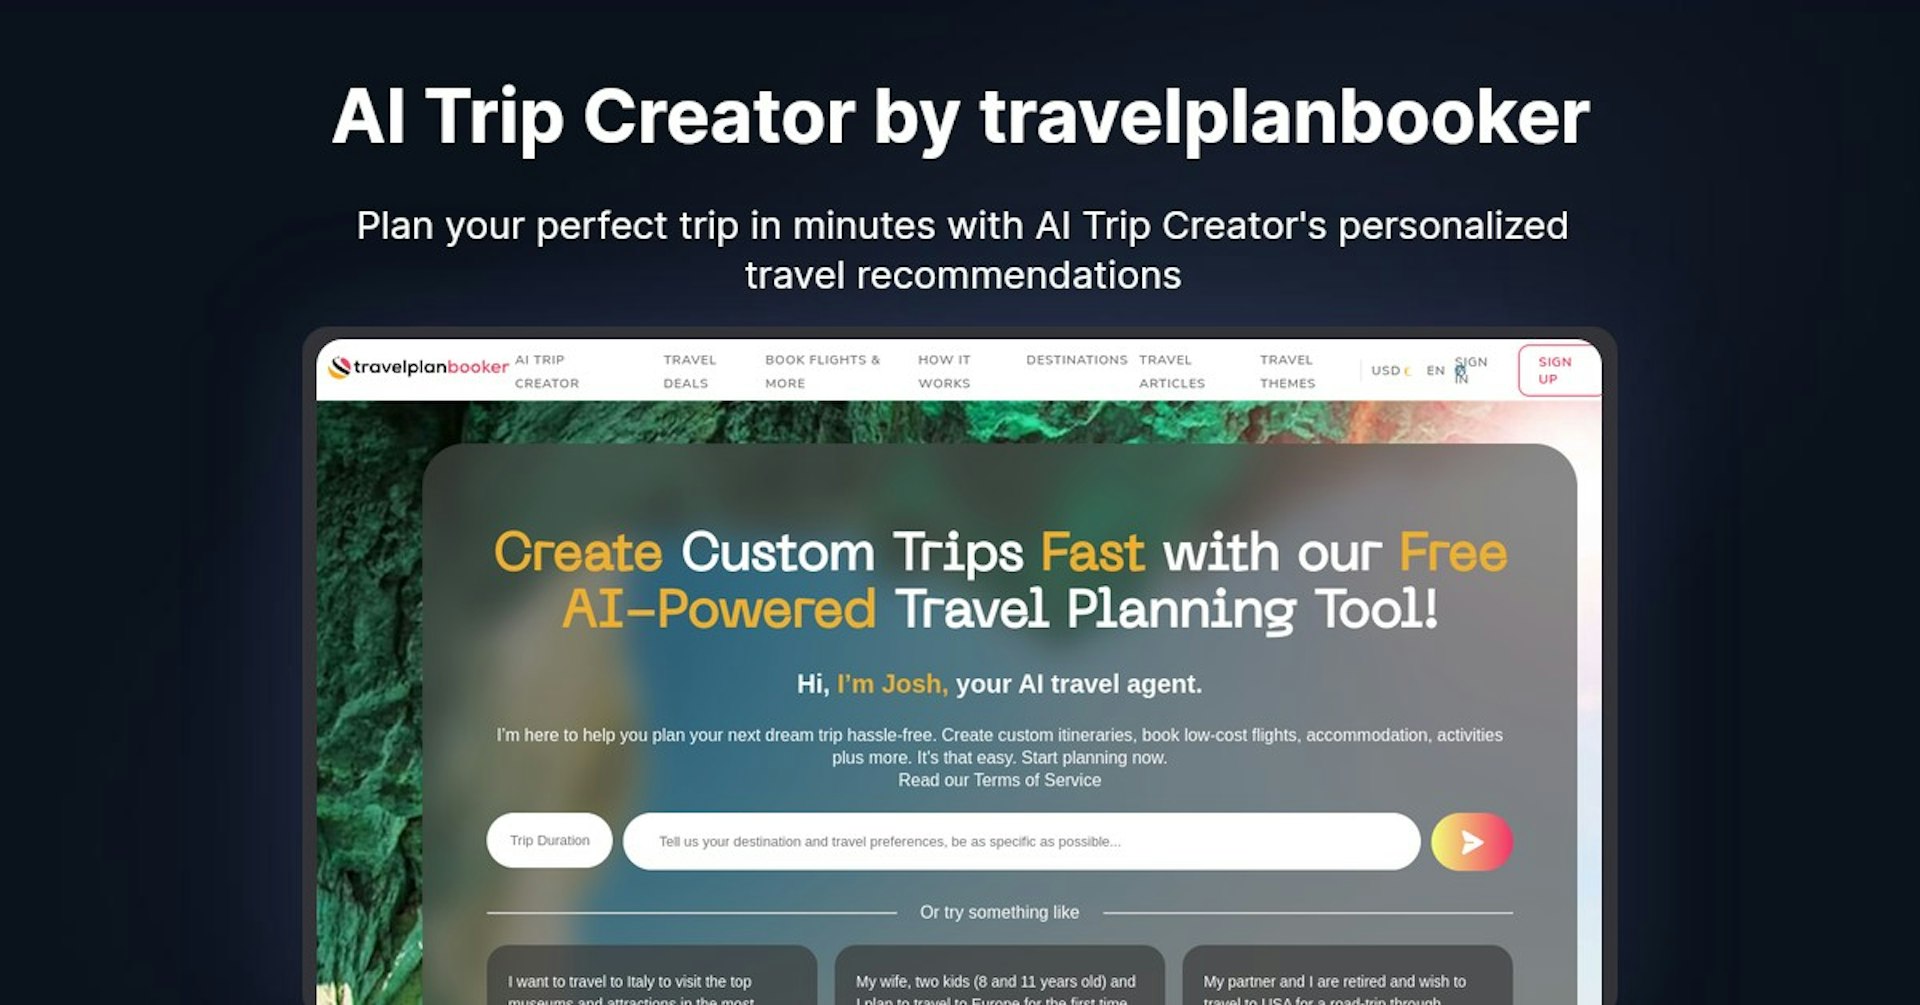 AI Trip Creator by travelplanbooker